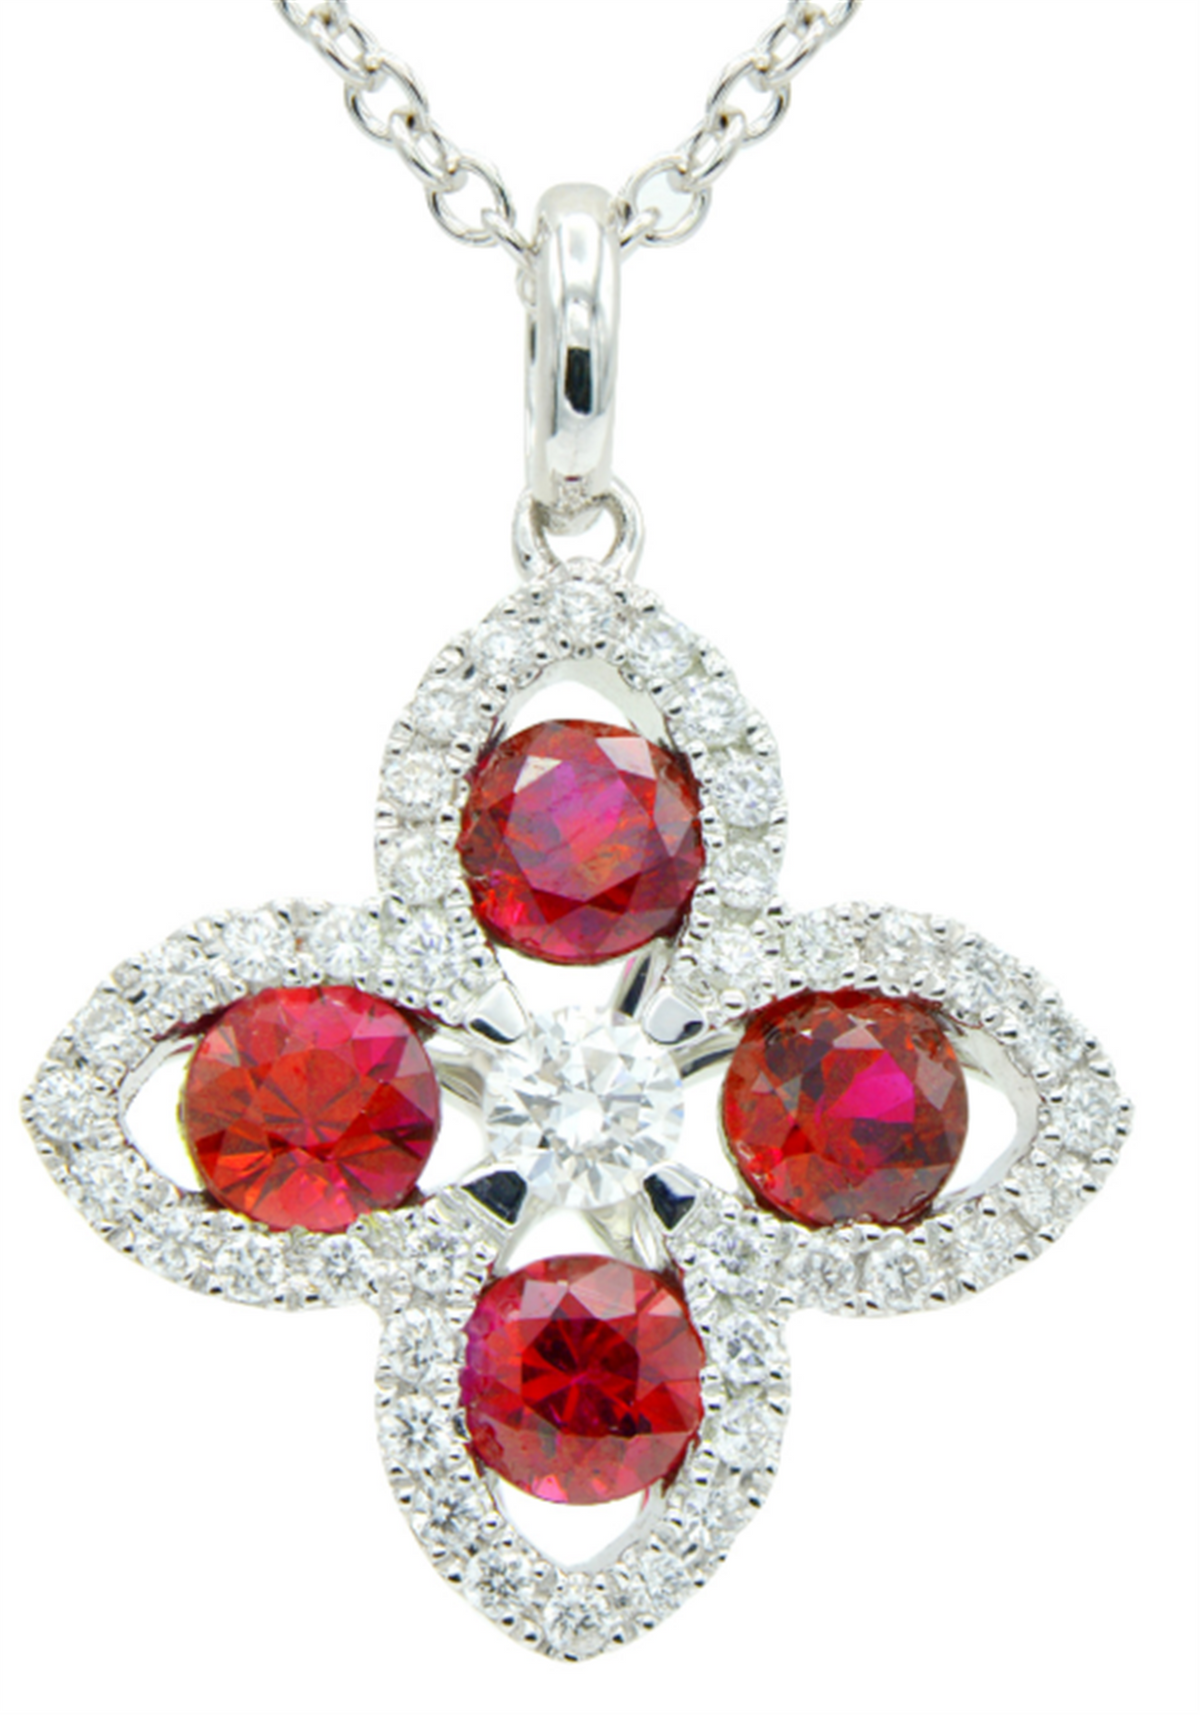 14Kt White Gold Floral Gemstone Pendant With 0.38ct Rubies